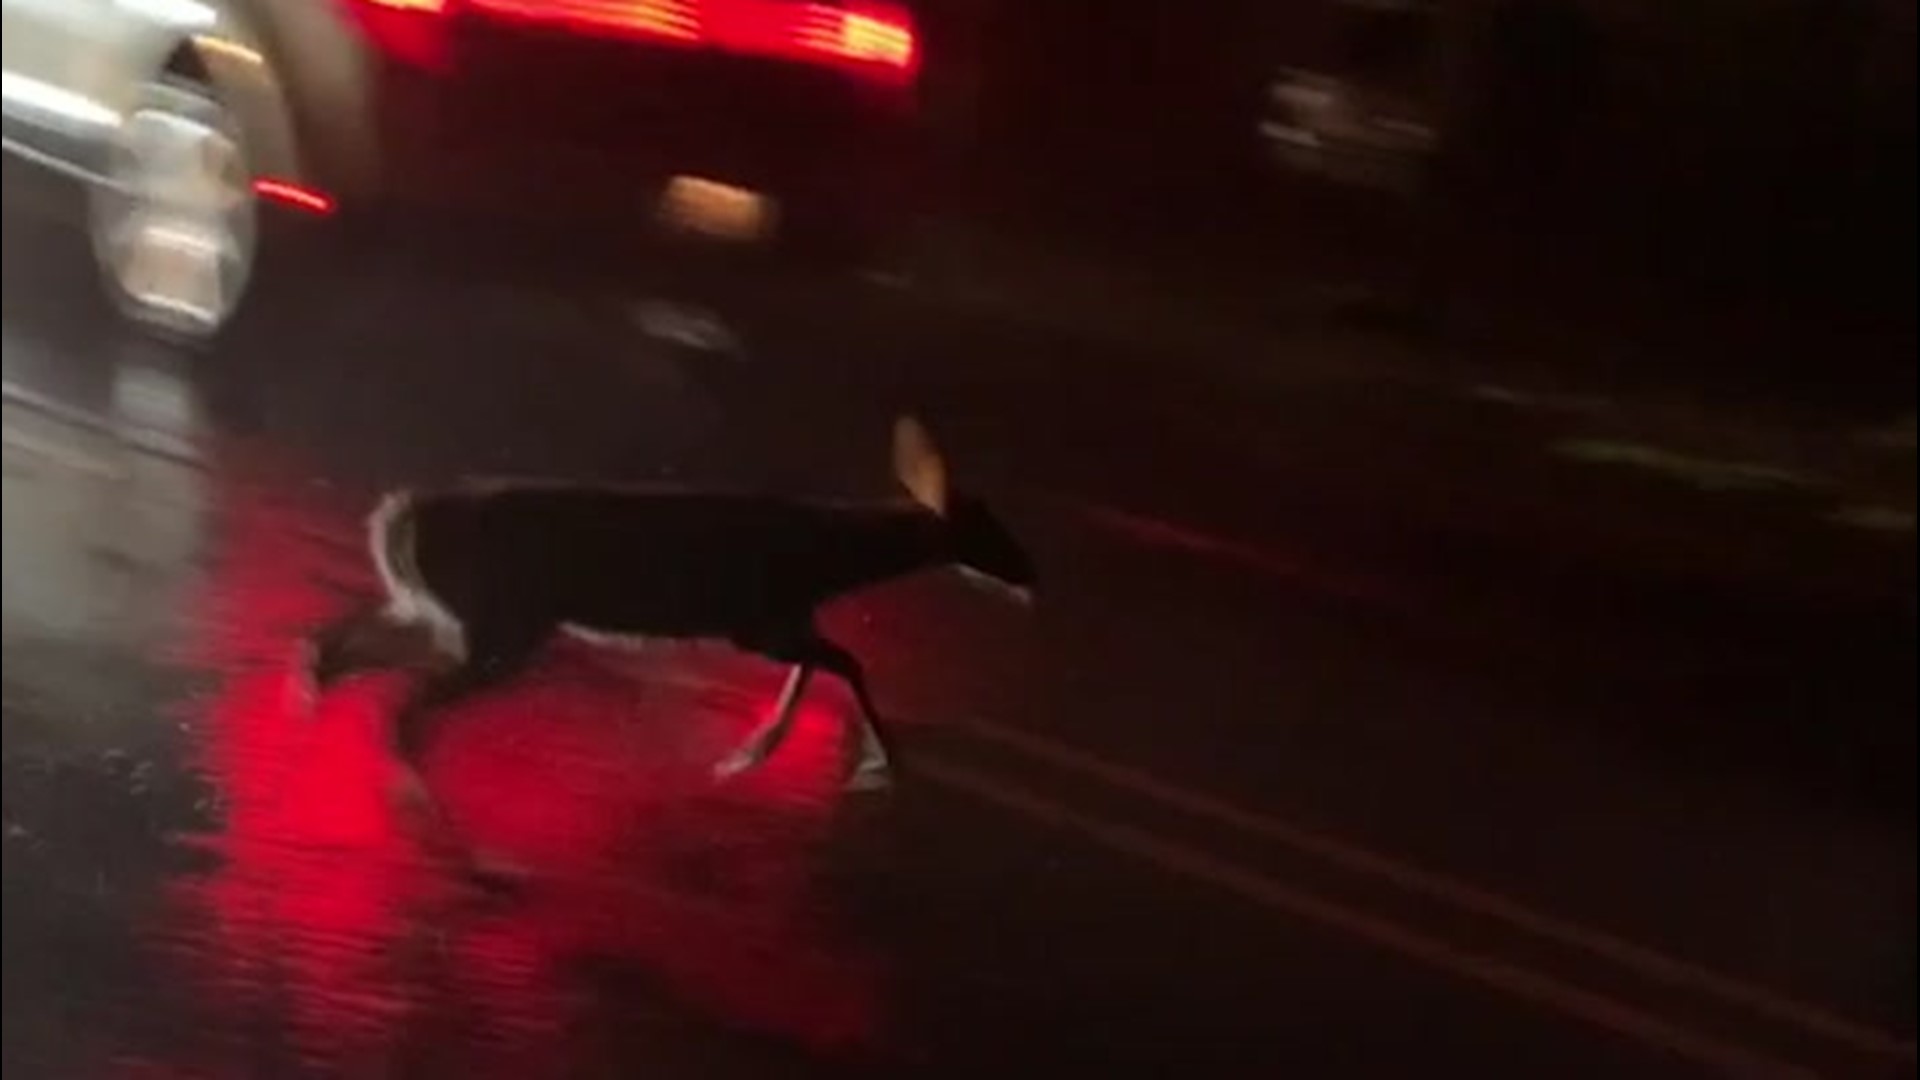 While Jonathan Petramala was on the scene in Oak Island, North Carolina, on Aug. 3, he managed to spot a deer running for its life in the harsh weather of Isaias.